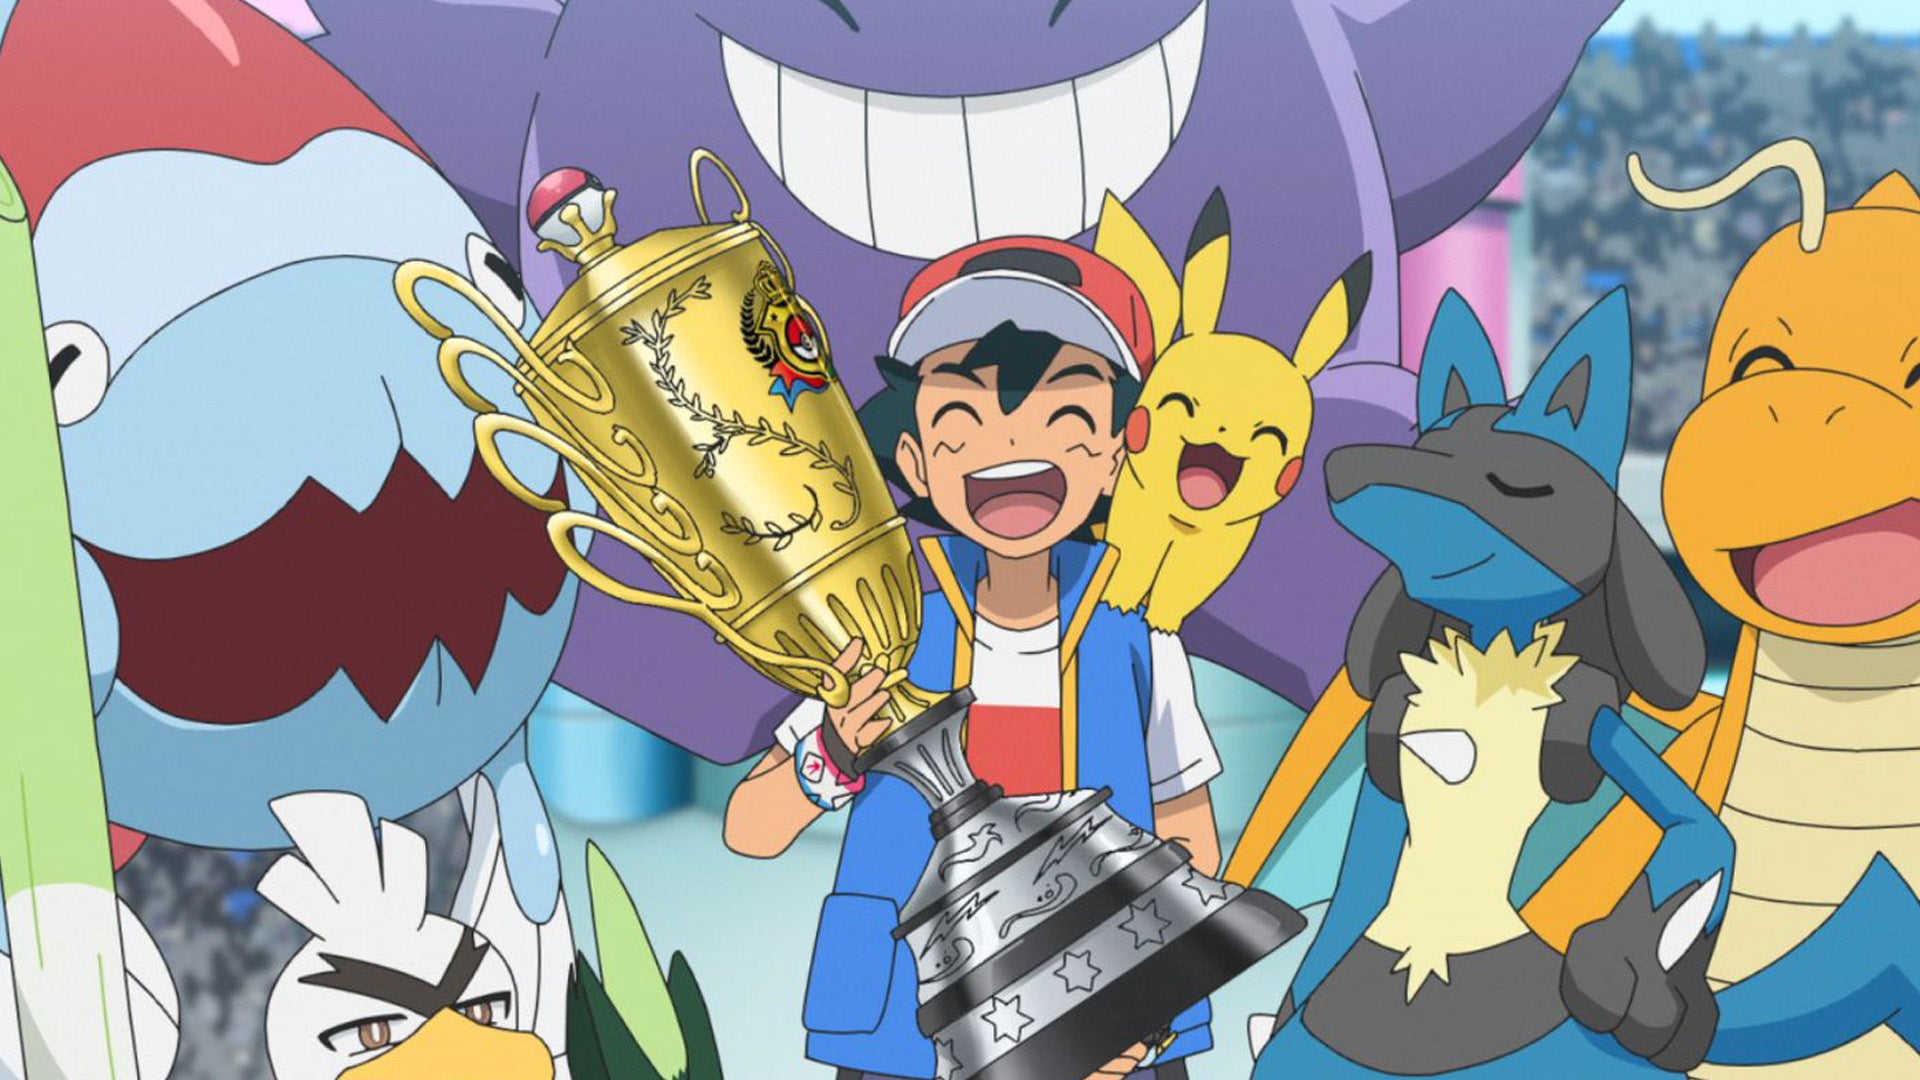 Ash Ketchum is officially the world's best Pokémon trainer,
bless him